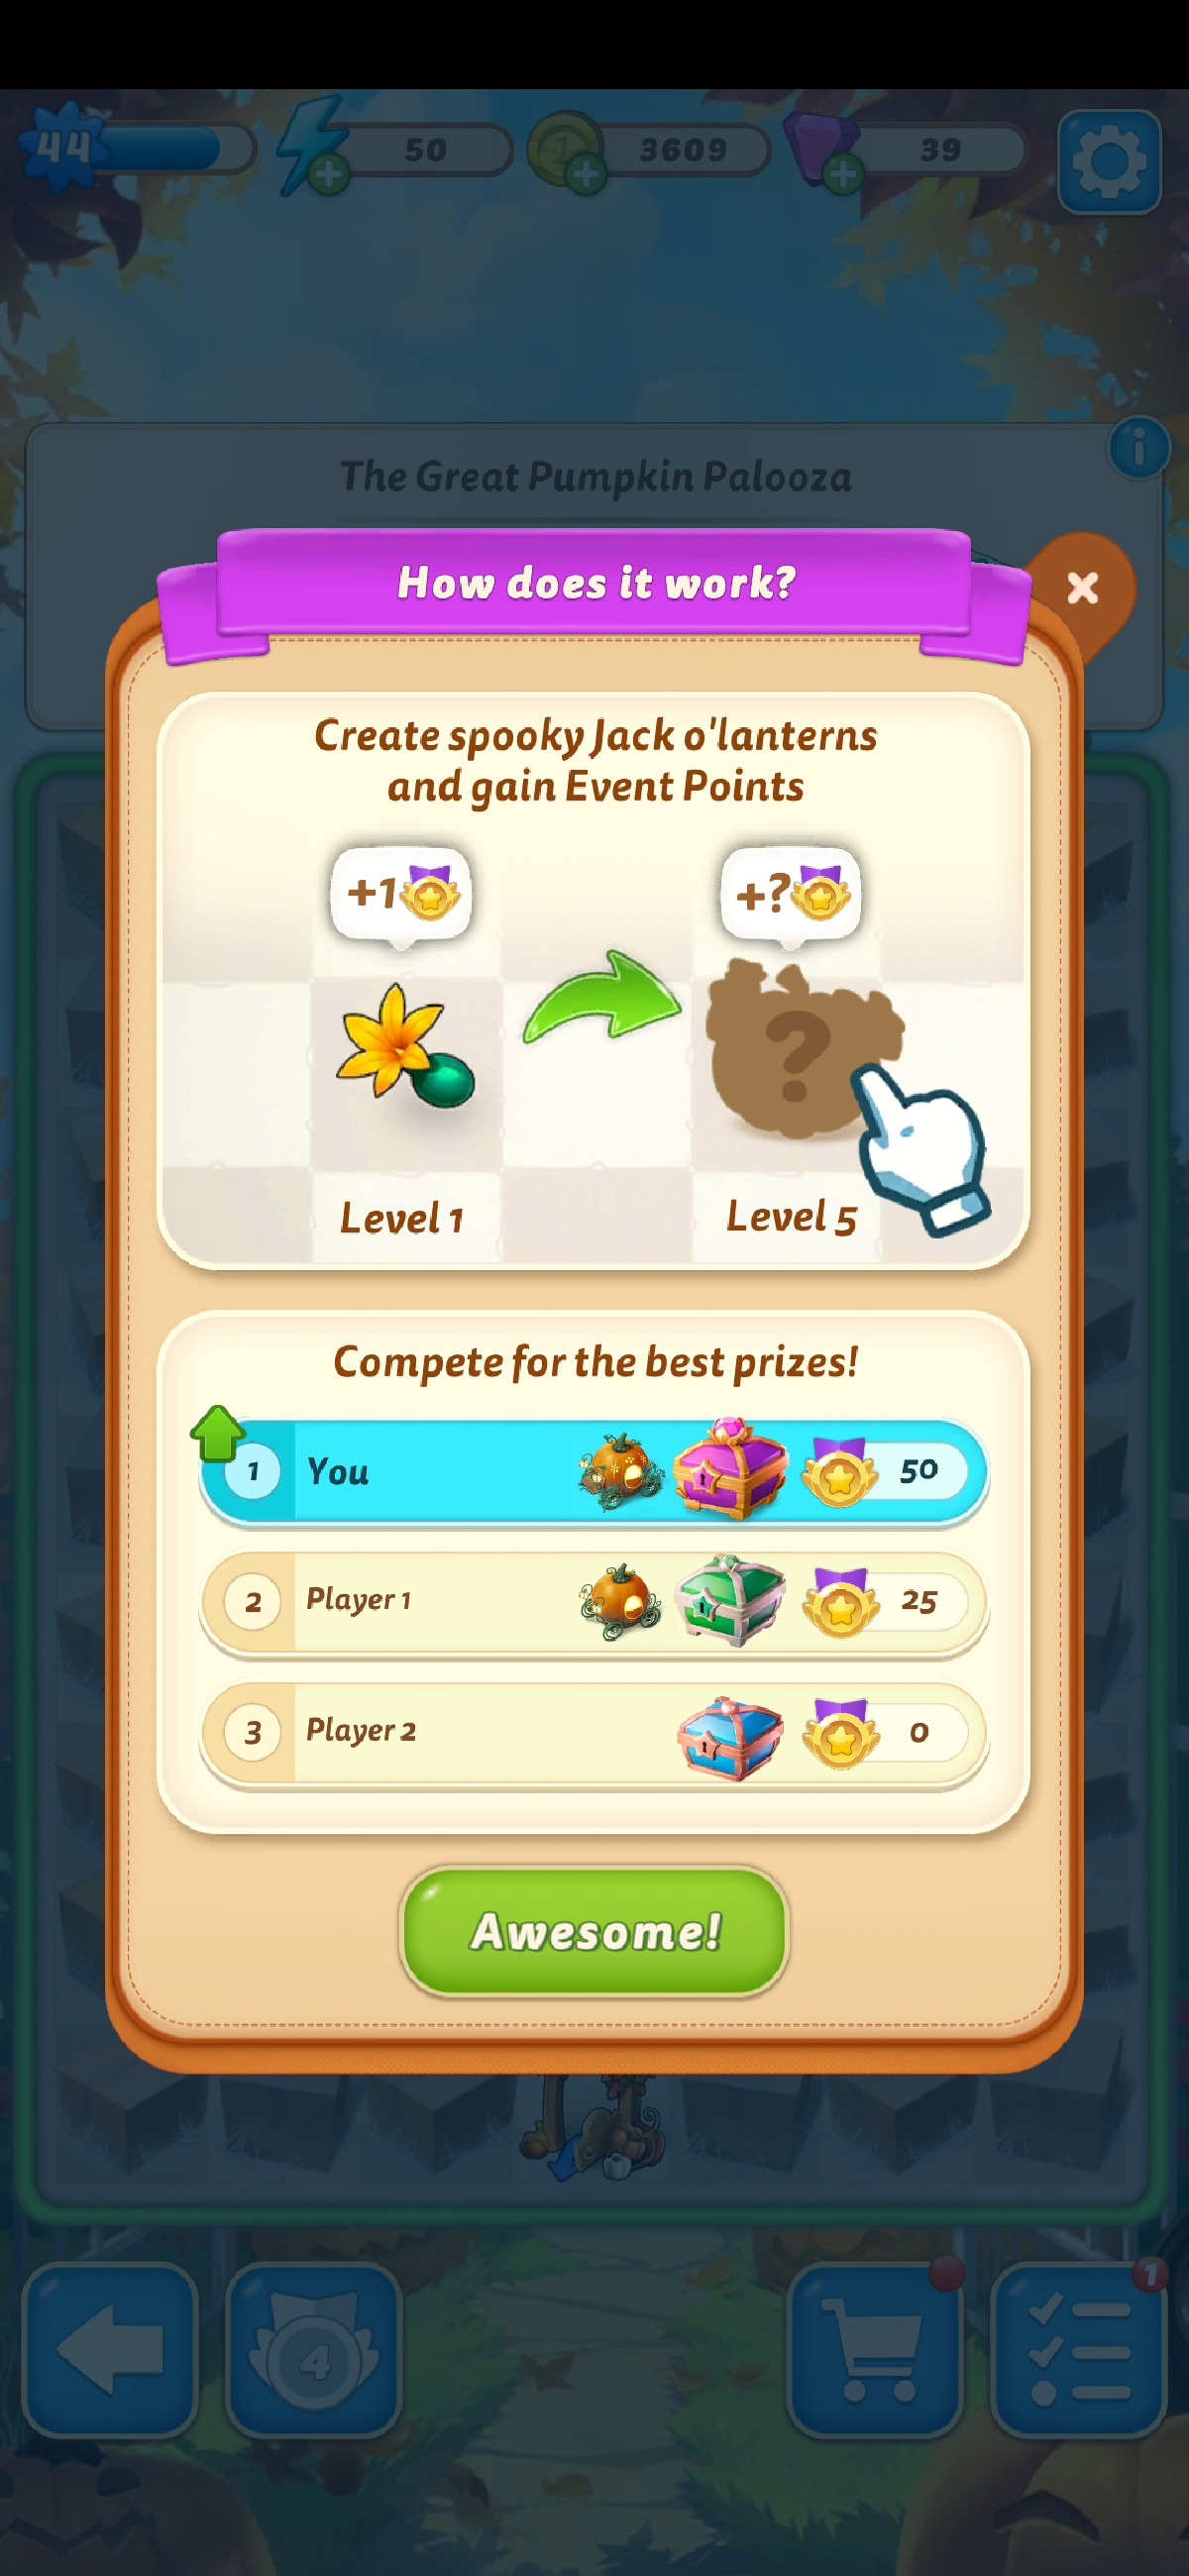 Image from Merge Mansion showing how The Great Pumpkin Palooza event works as part of an article explaining all the rewards and how to win at the event.